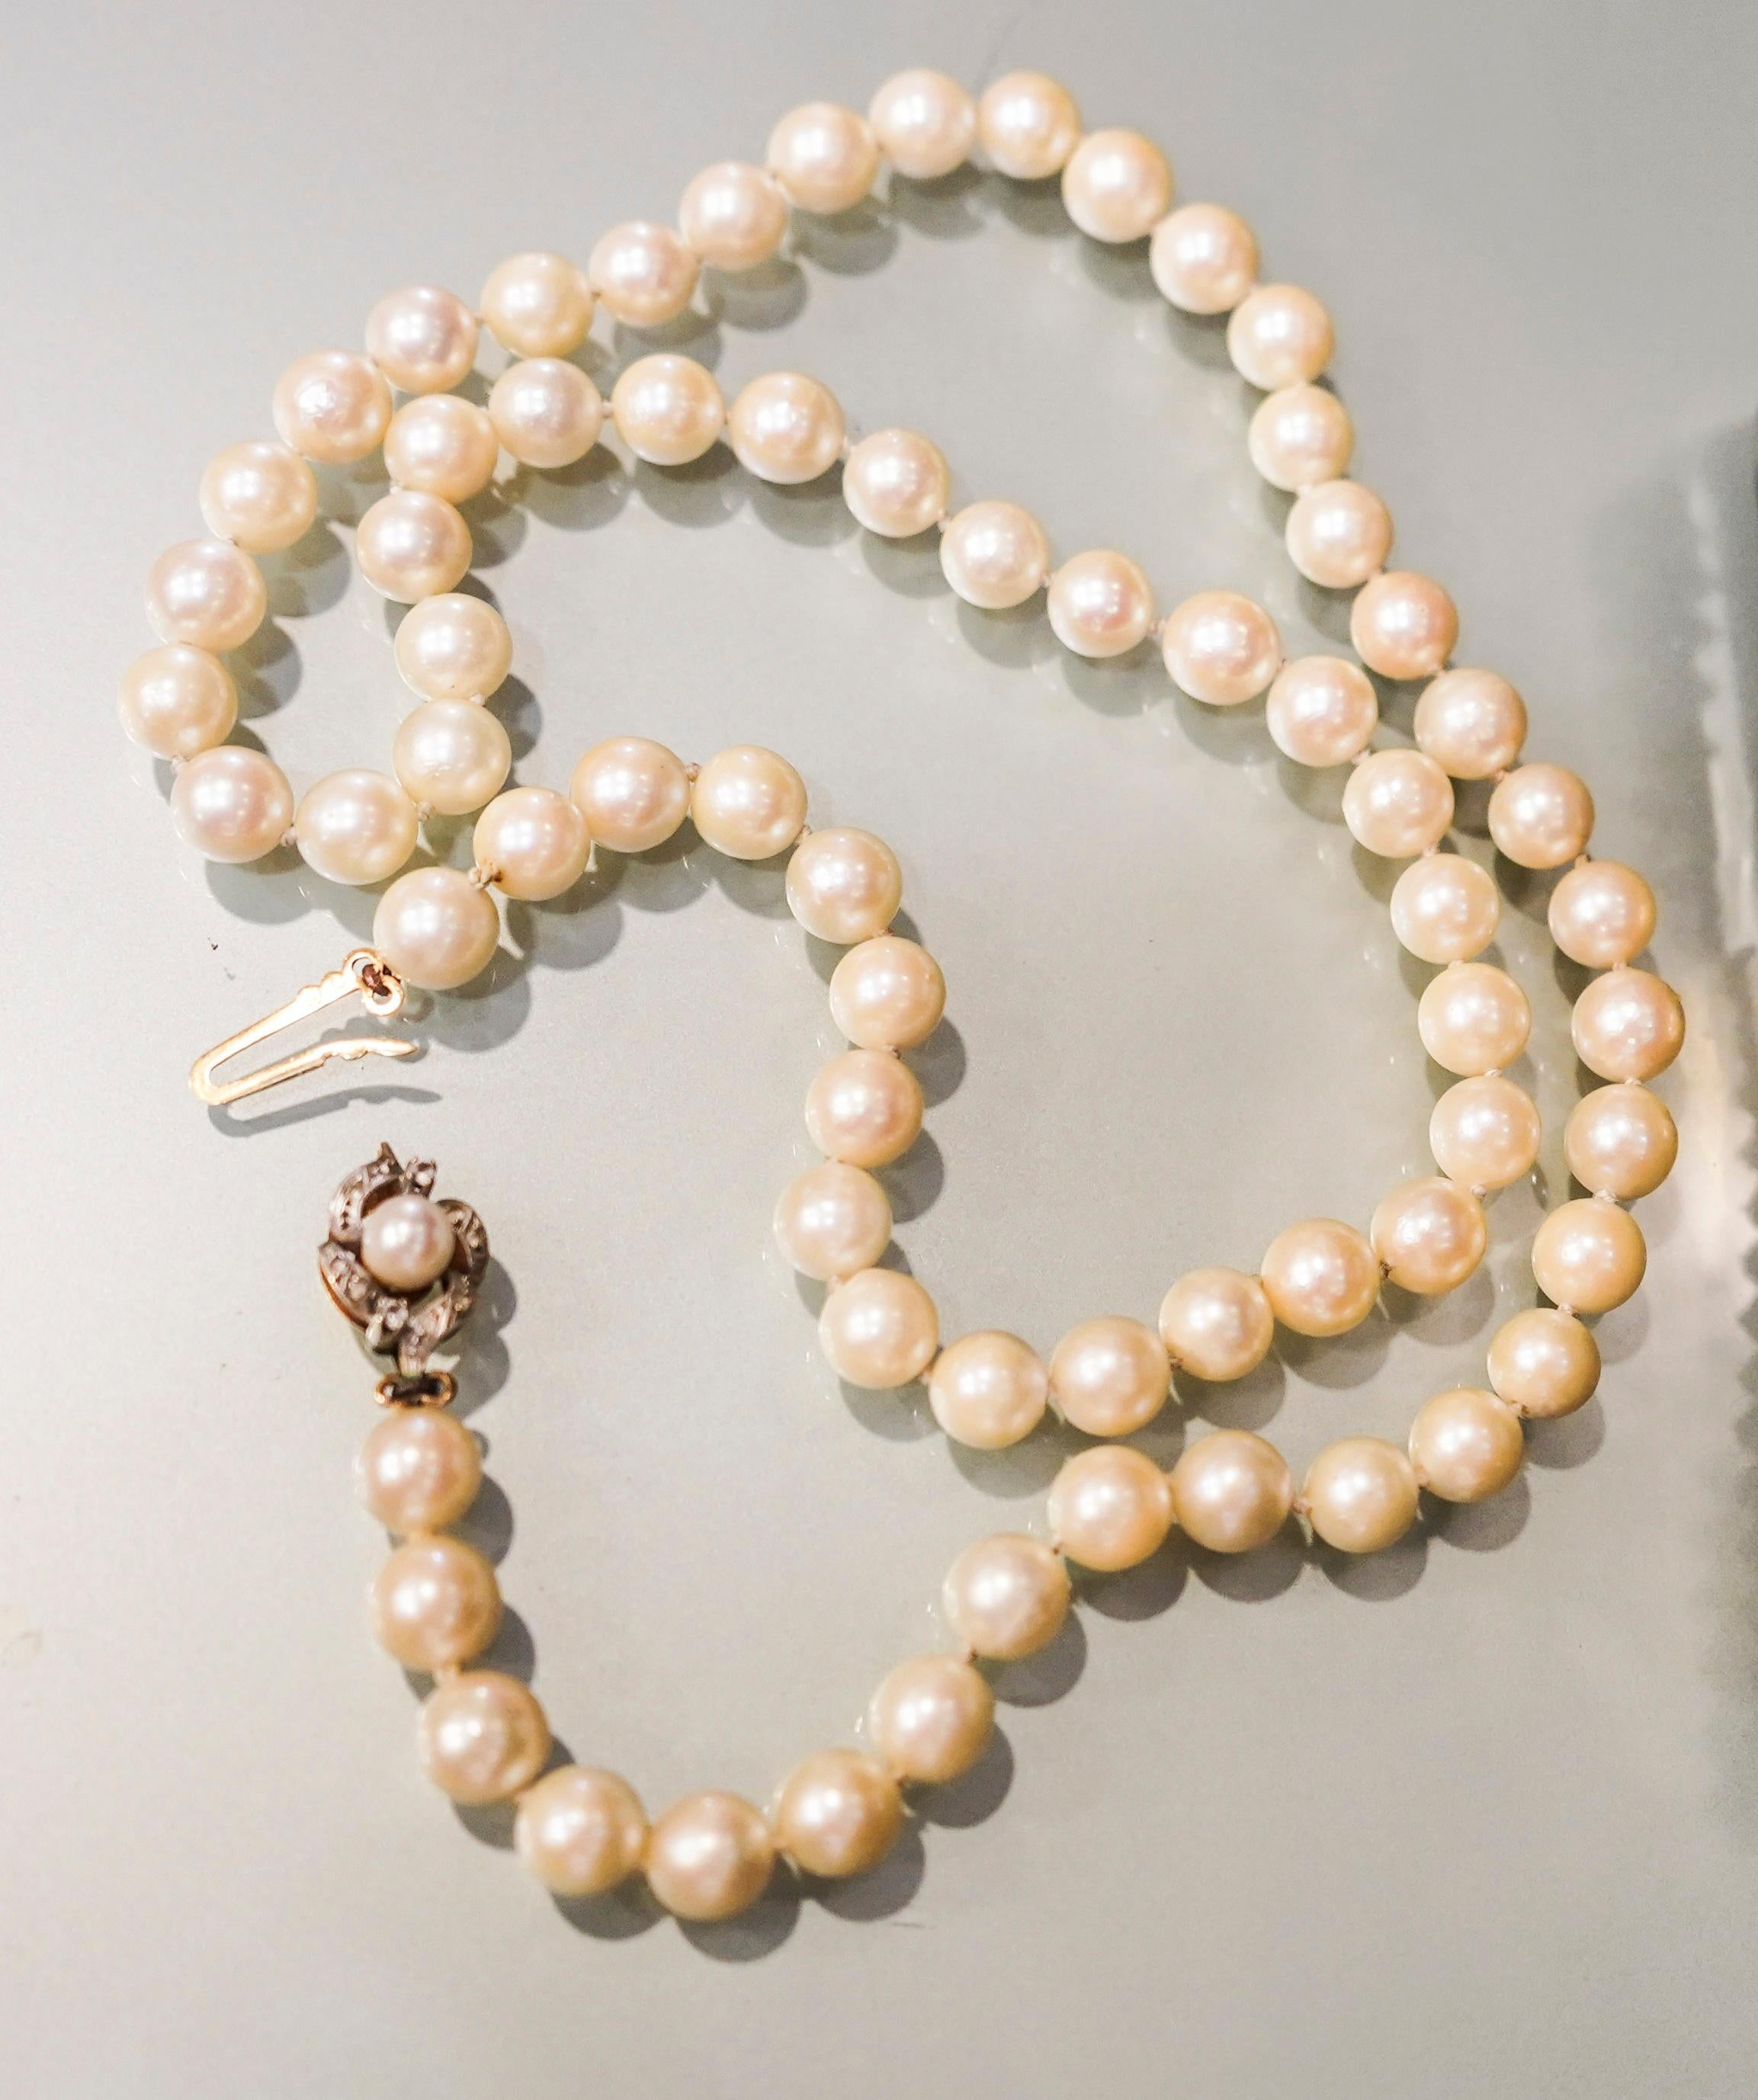 Late 19th Century 19th Century Pearl Necklace and Brooch Ingold and Diamonds Cut Brilliant